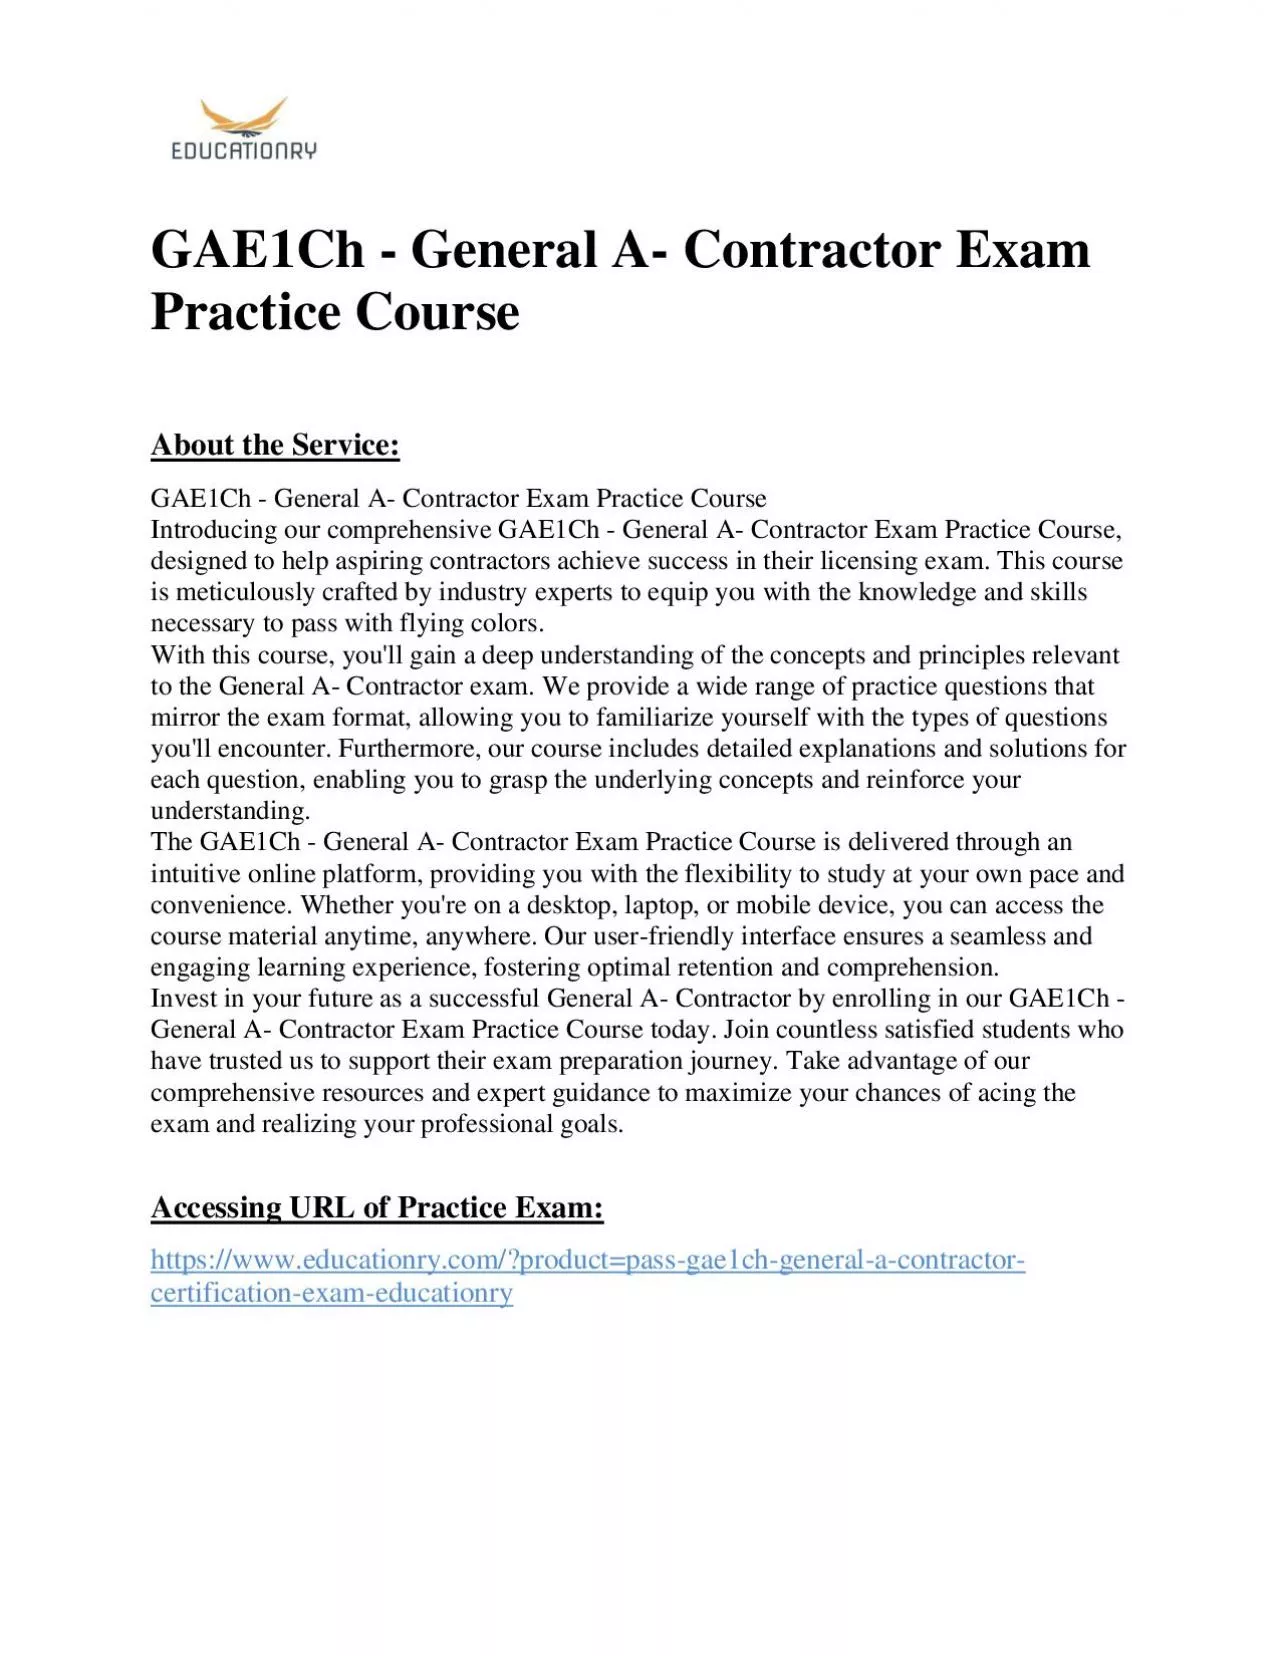 GAE1Ch - General A- Contractor Exam Practice Course